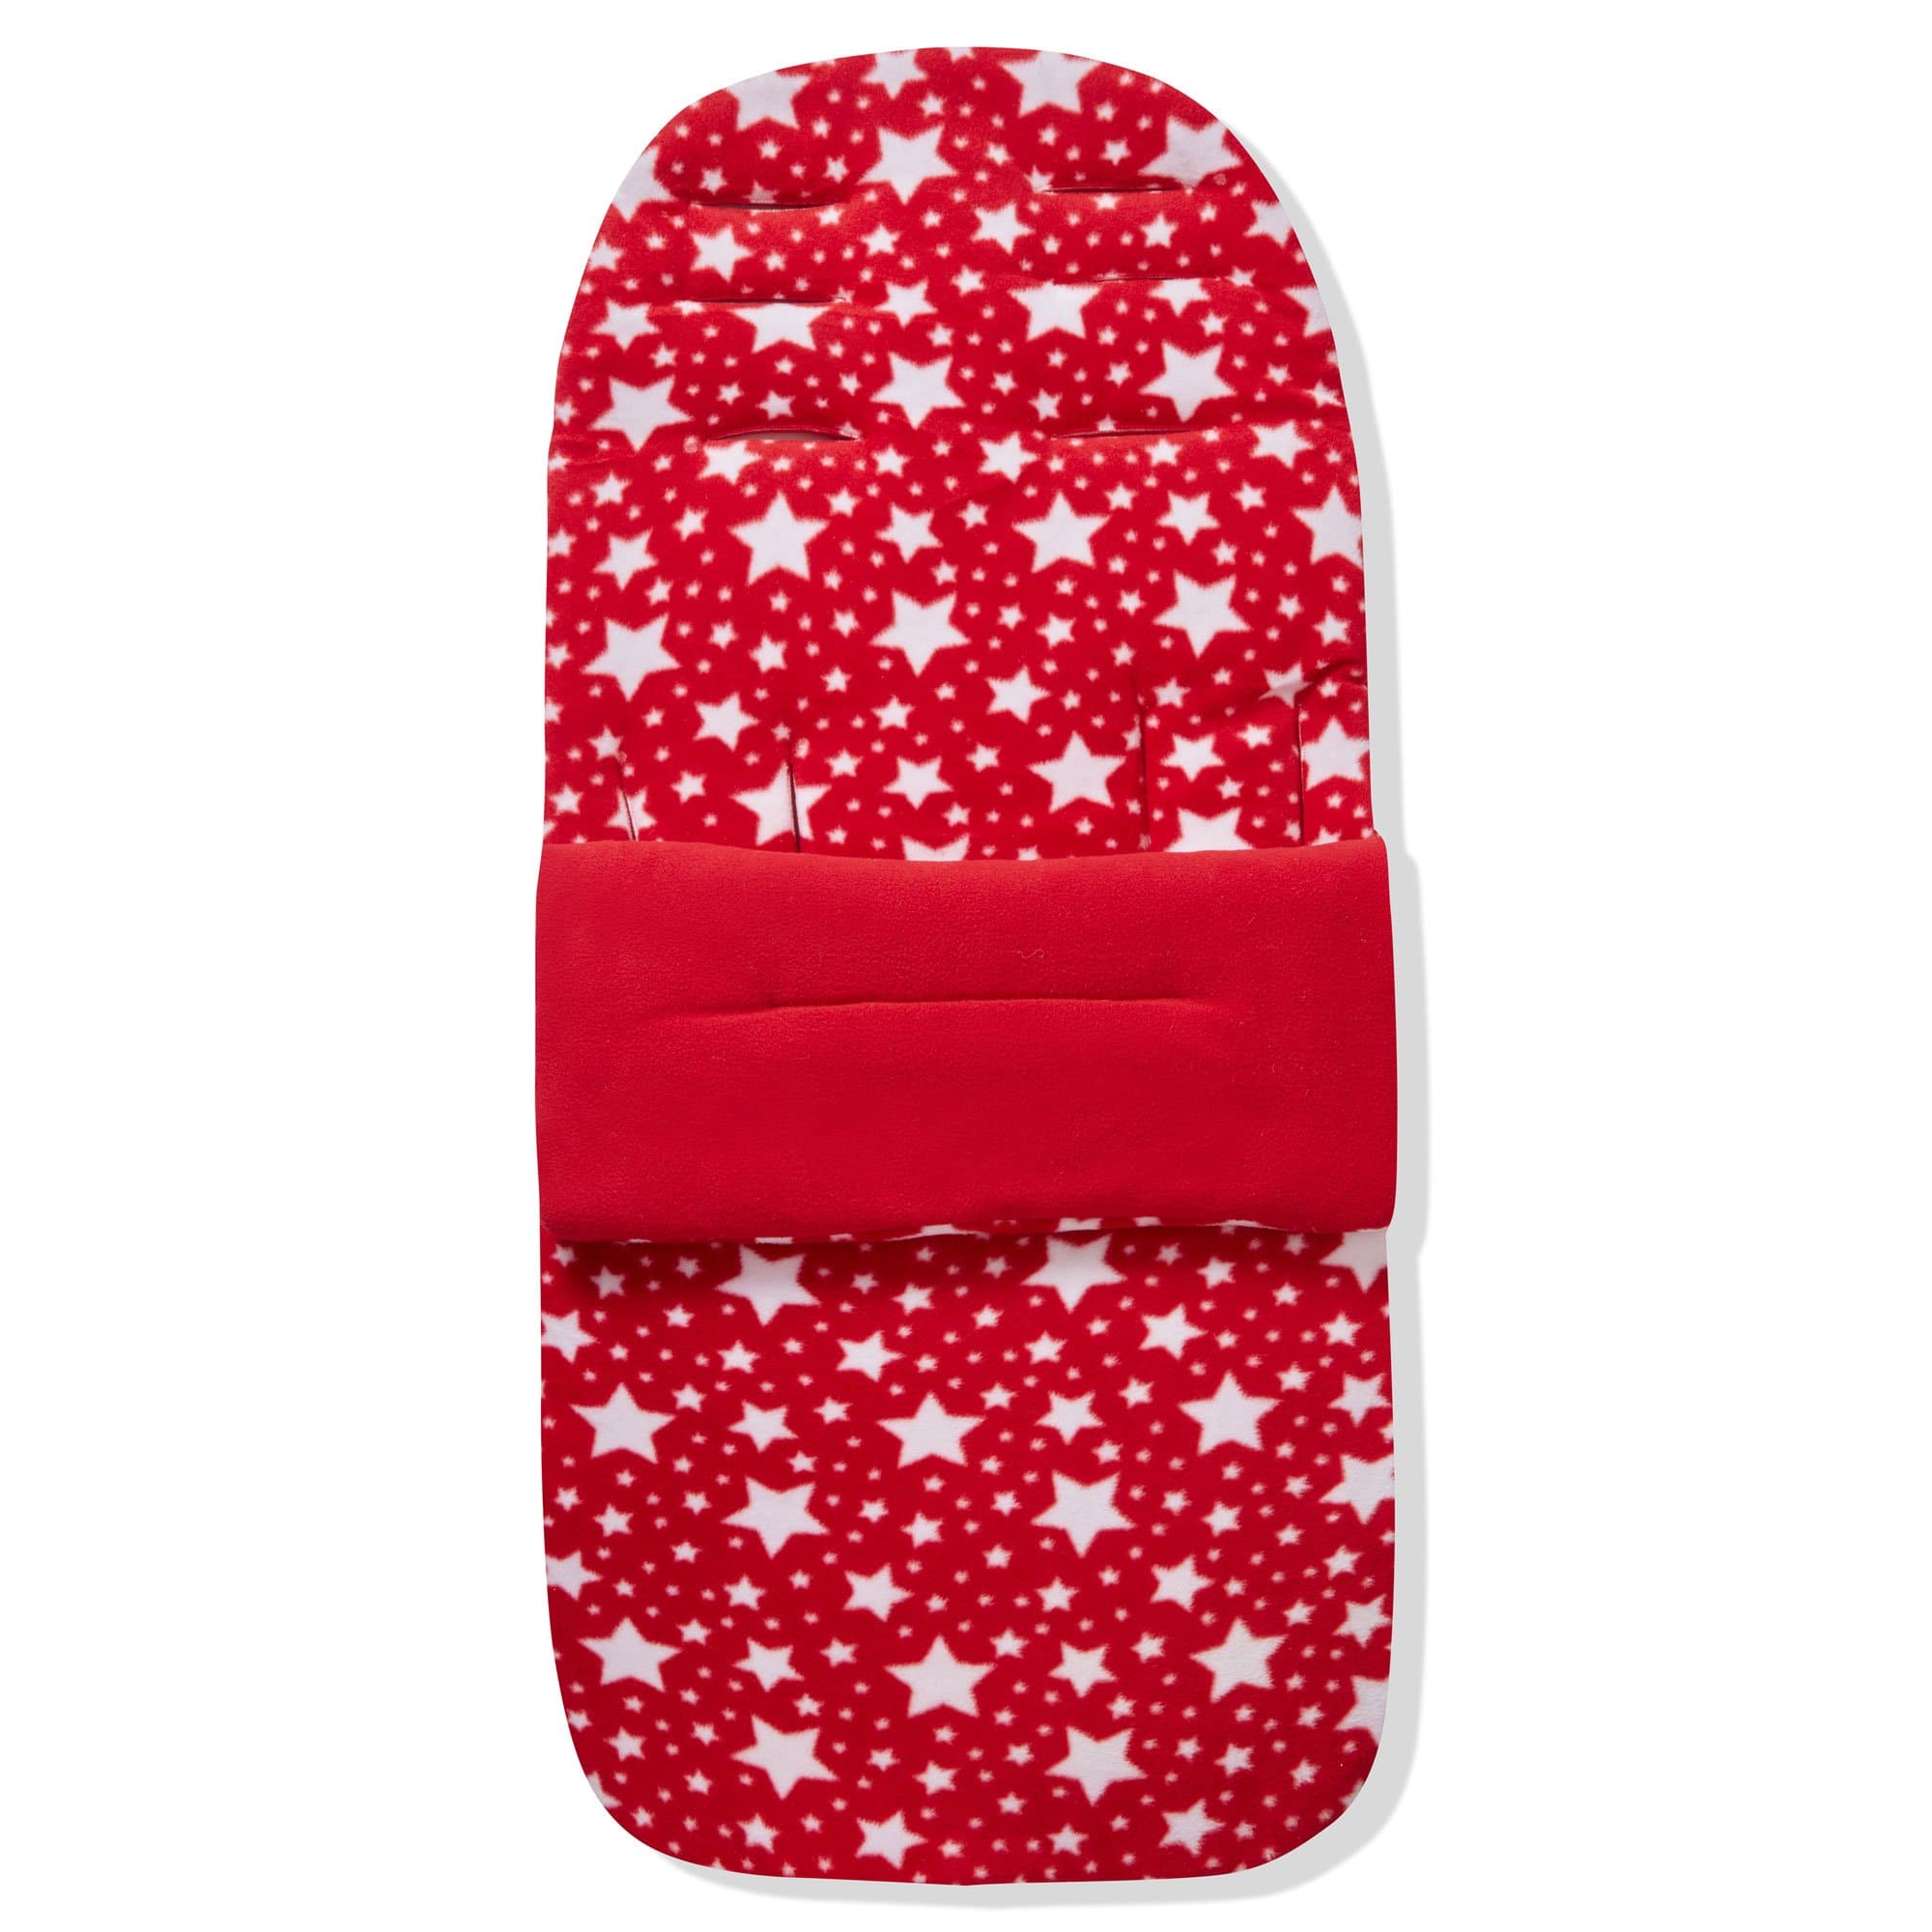 Fleece Footmuff / Cosy Toes Compatible with Bebecar - Red Star / Fits All Models | For Your Little One